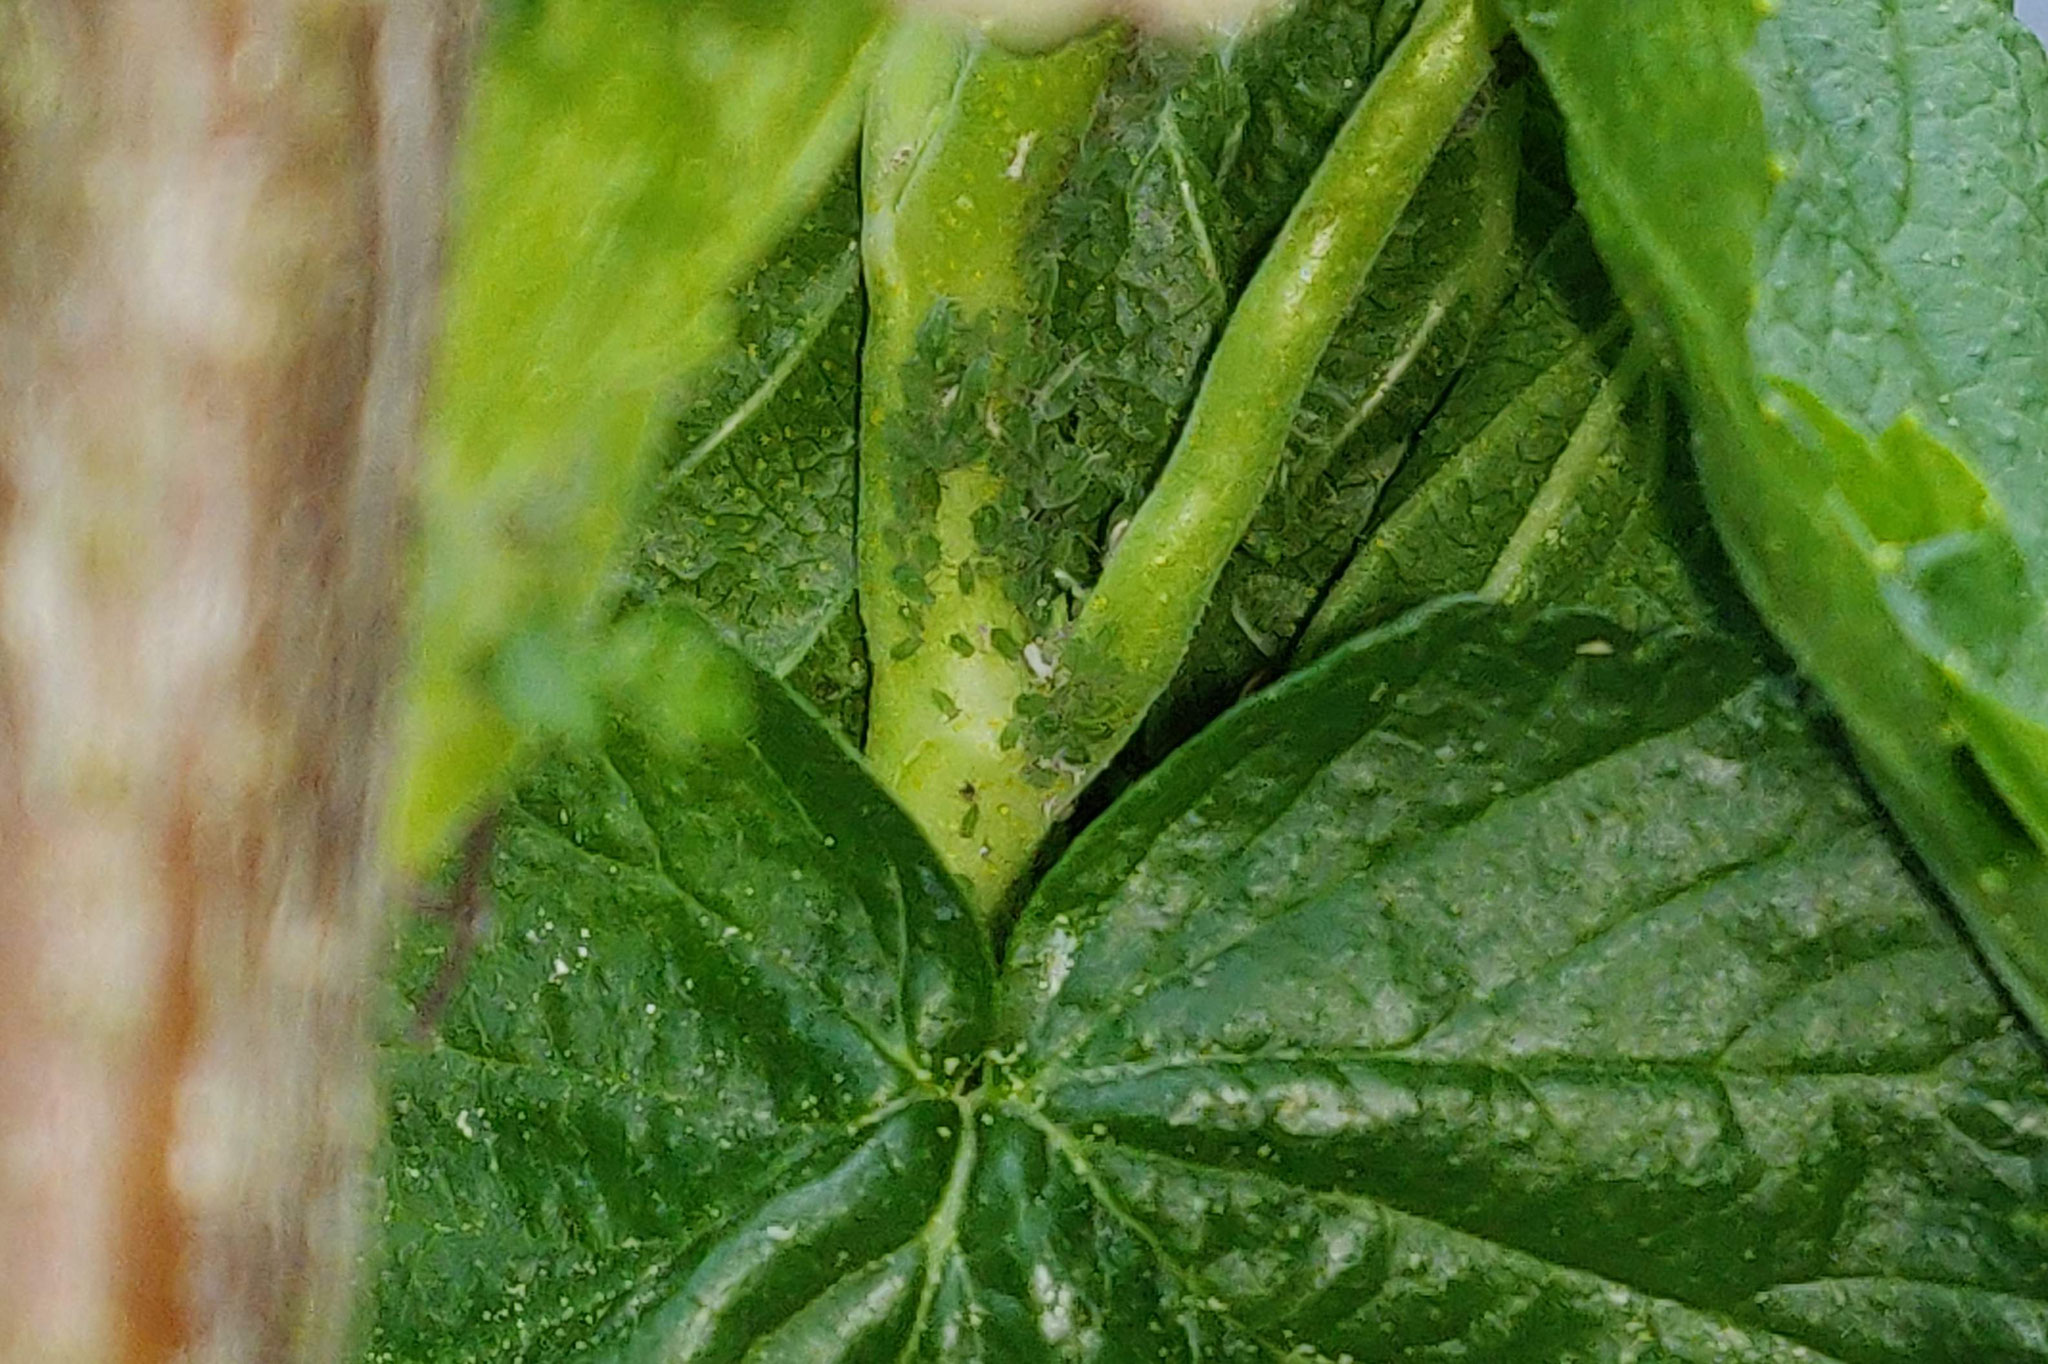 Treatment of aphids with KE-mineral